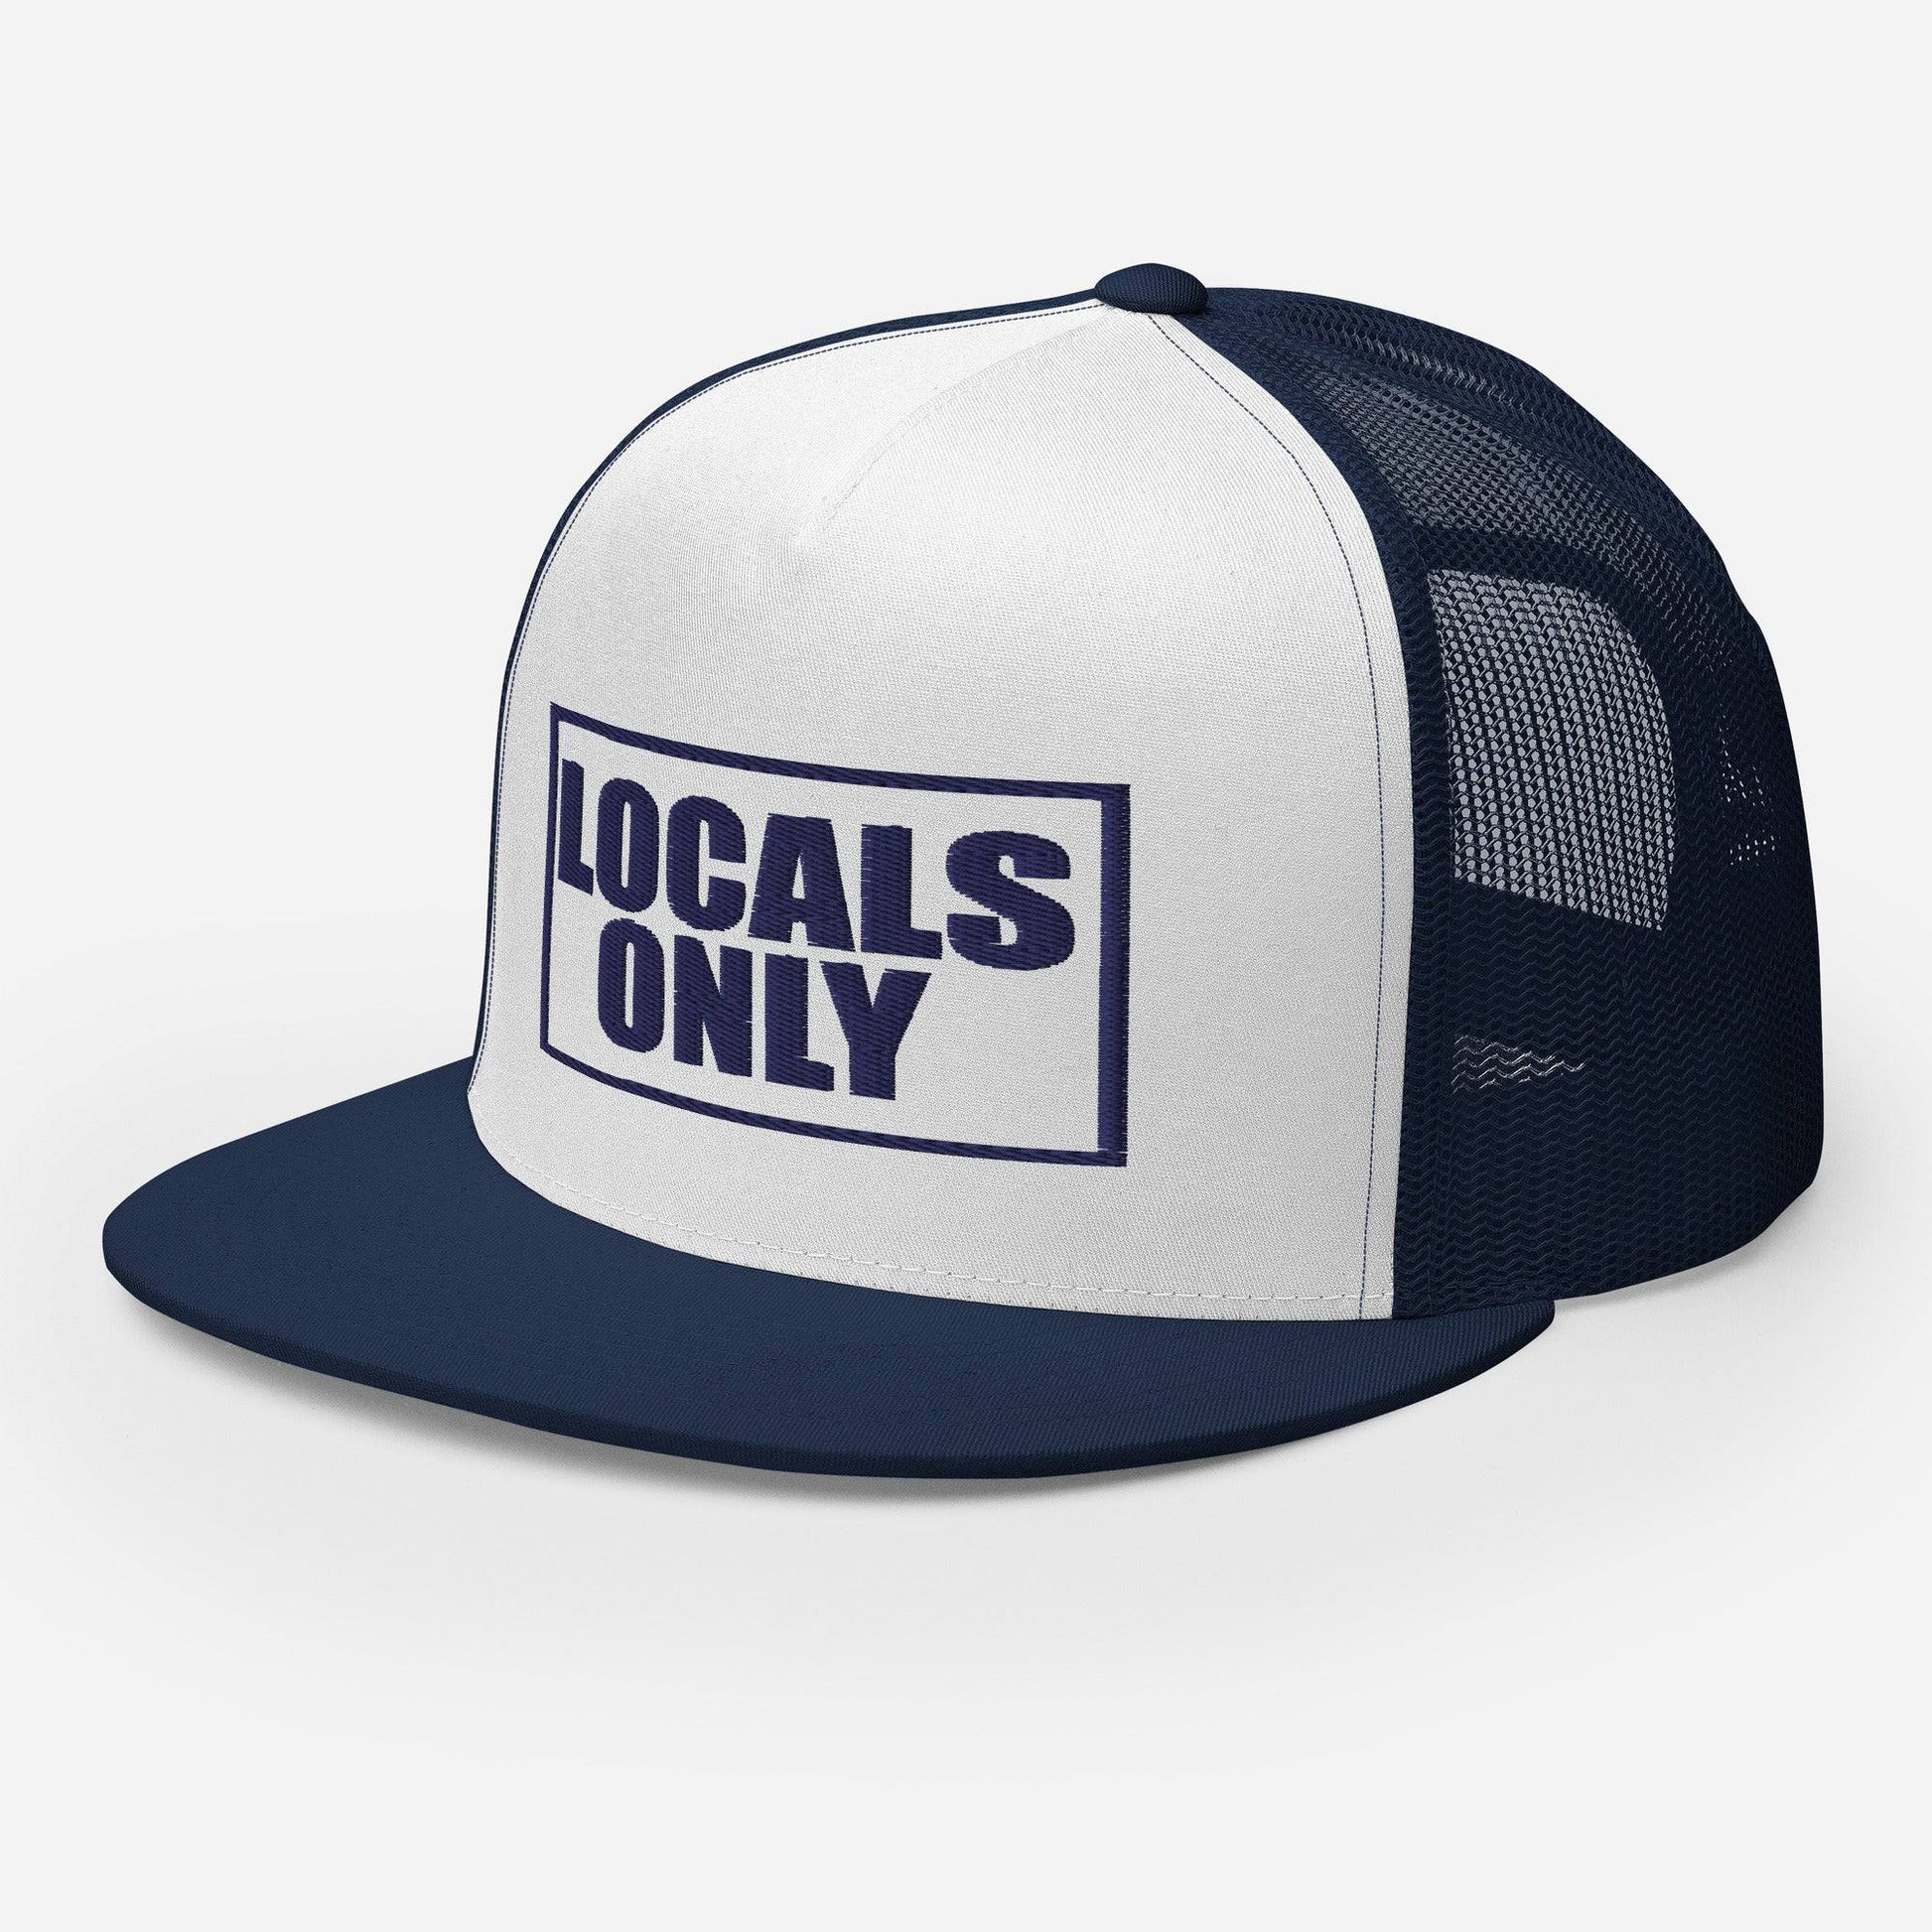 Locals Only Logo-Embroidered and Mesh Trucker Cap - Pixel Gallery